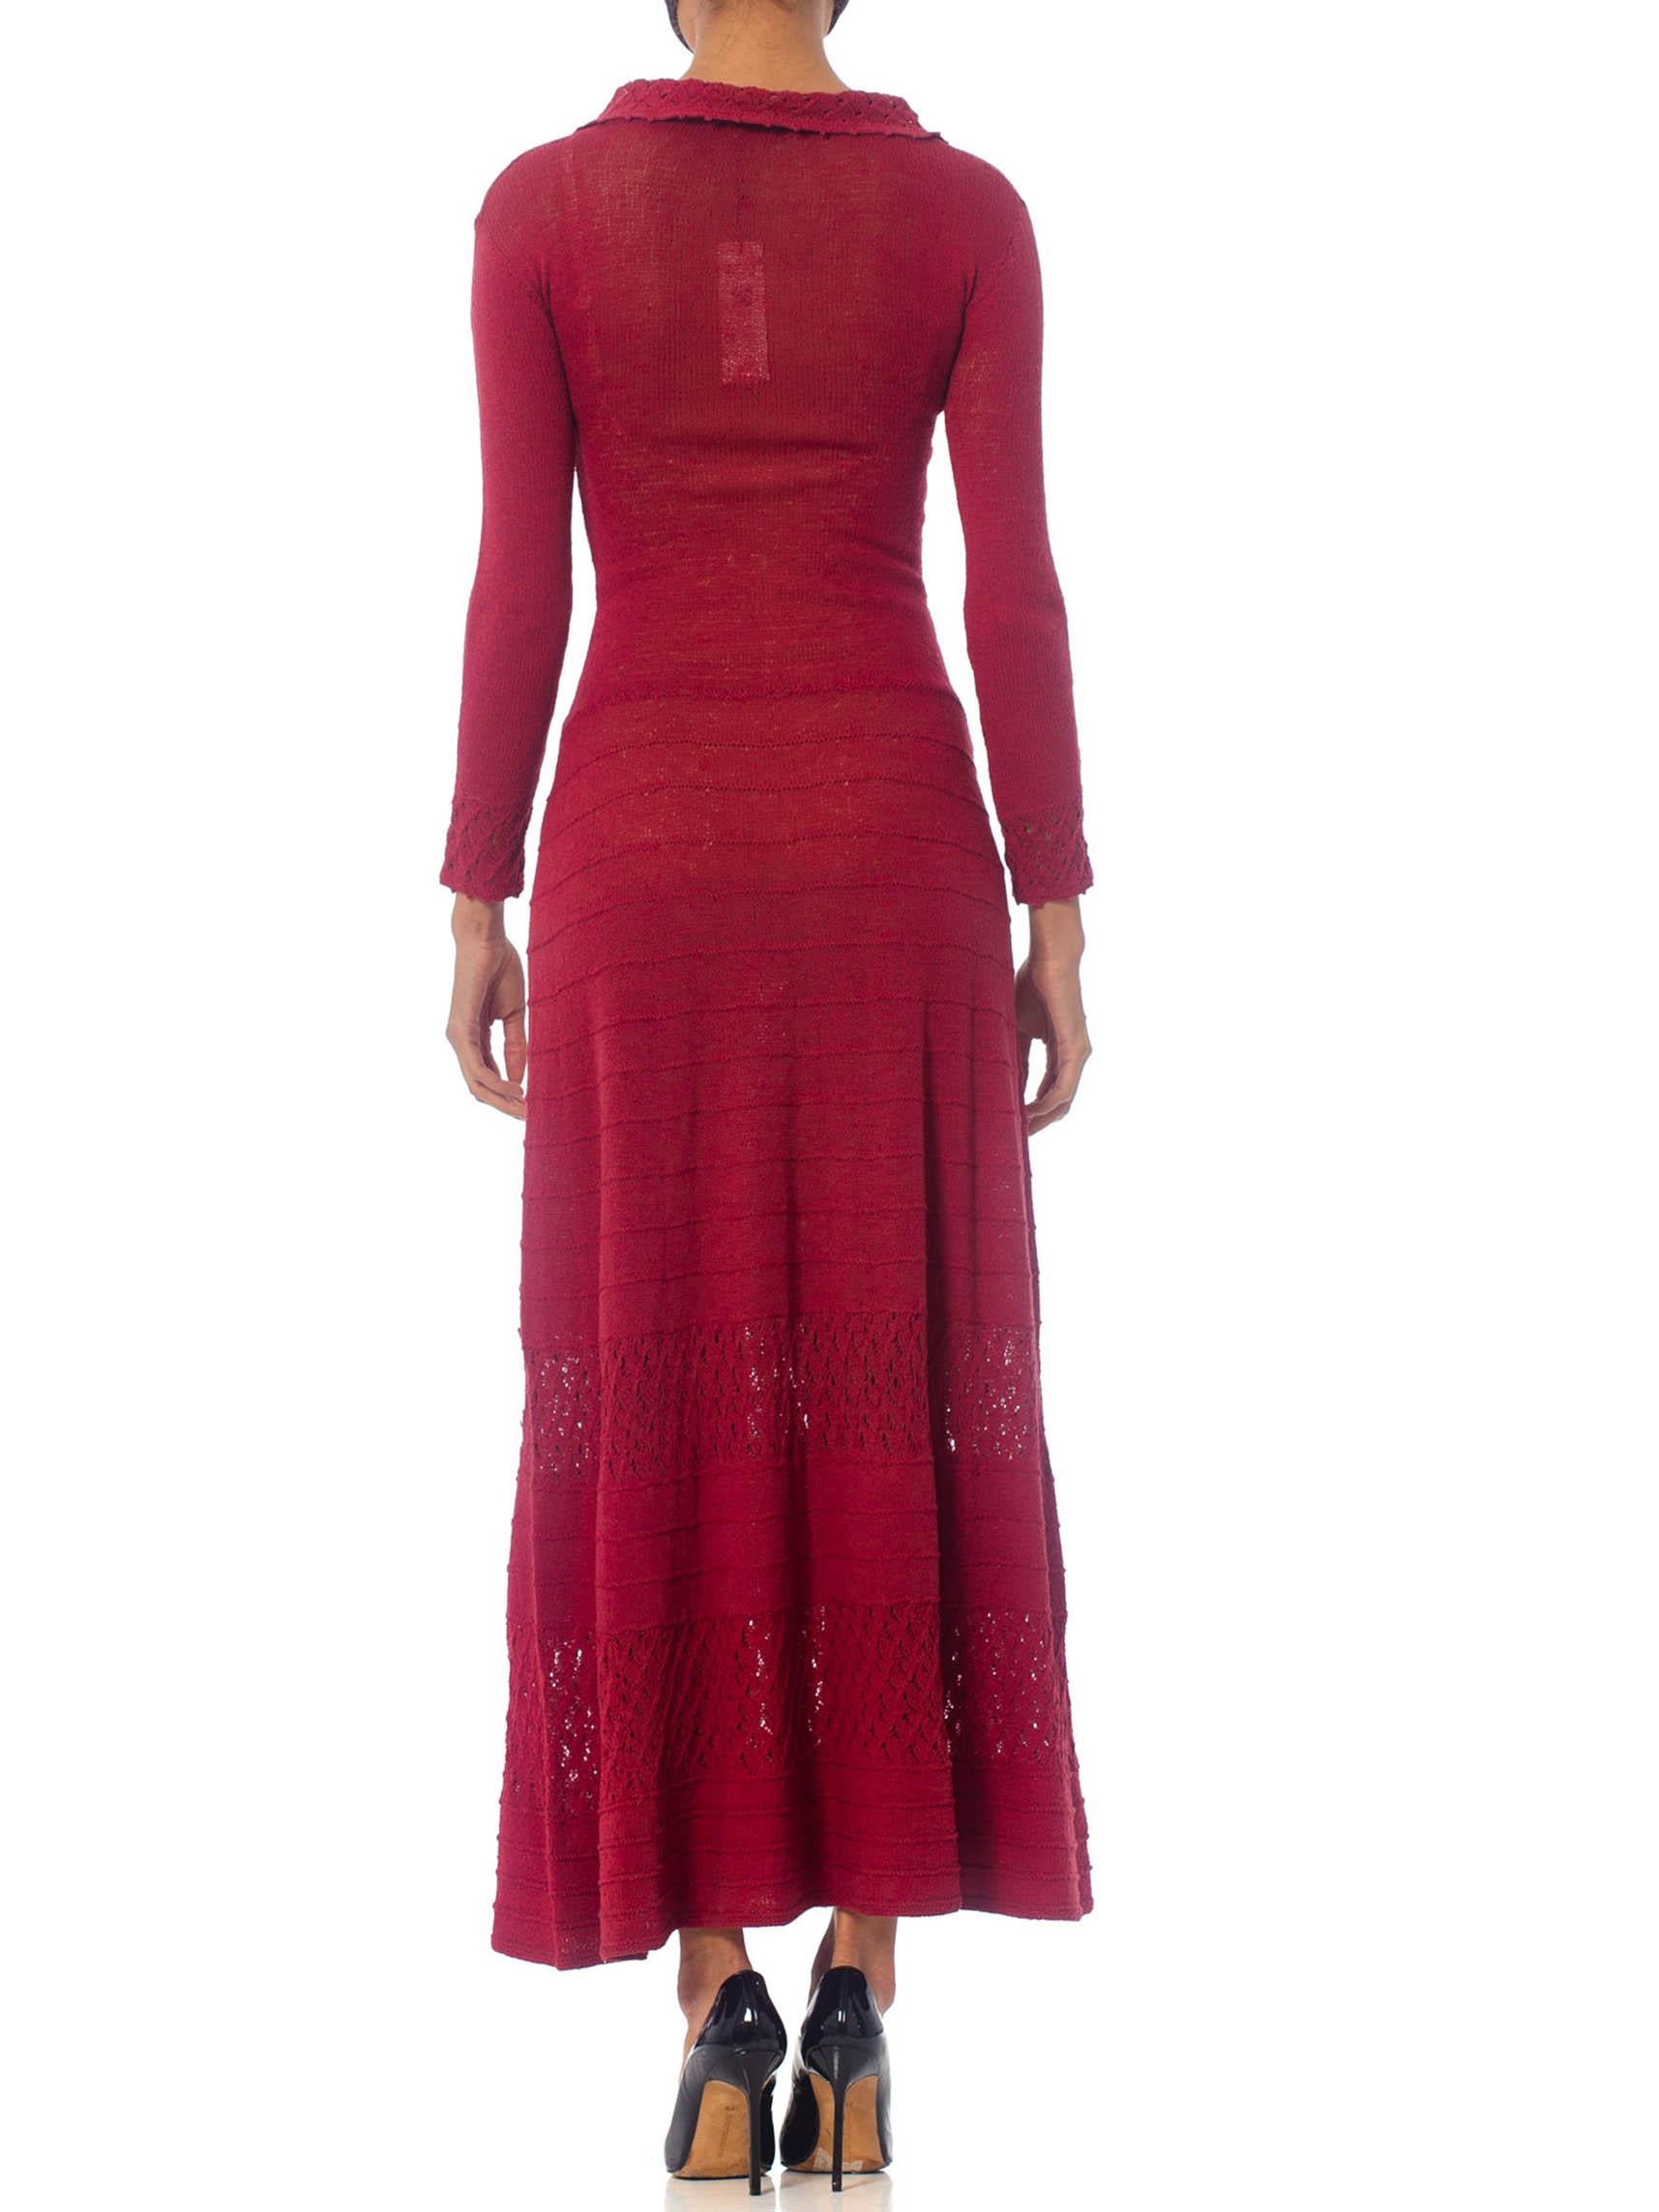 1930S Cranberry Red Rare Rayon Blend Knit Maxi Dress With Sleeves In Excellent Condition For Sale In New York, NY